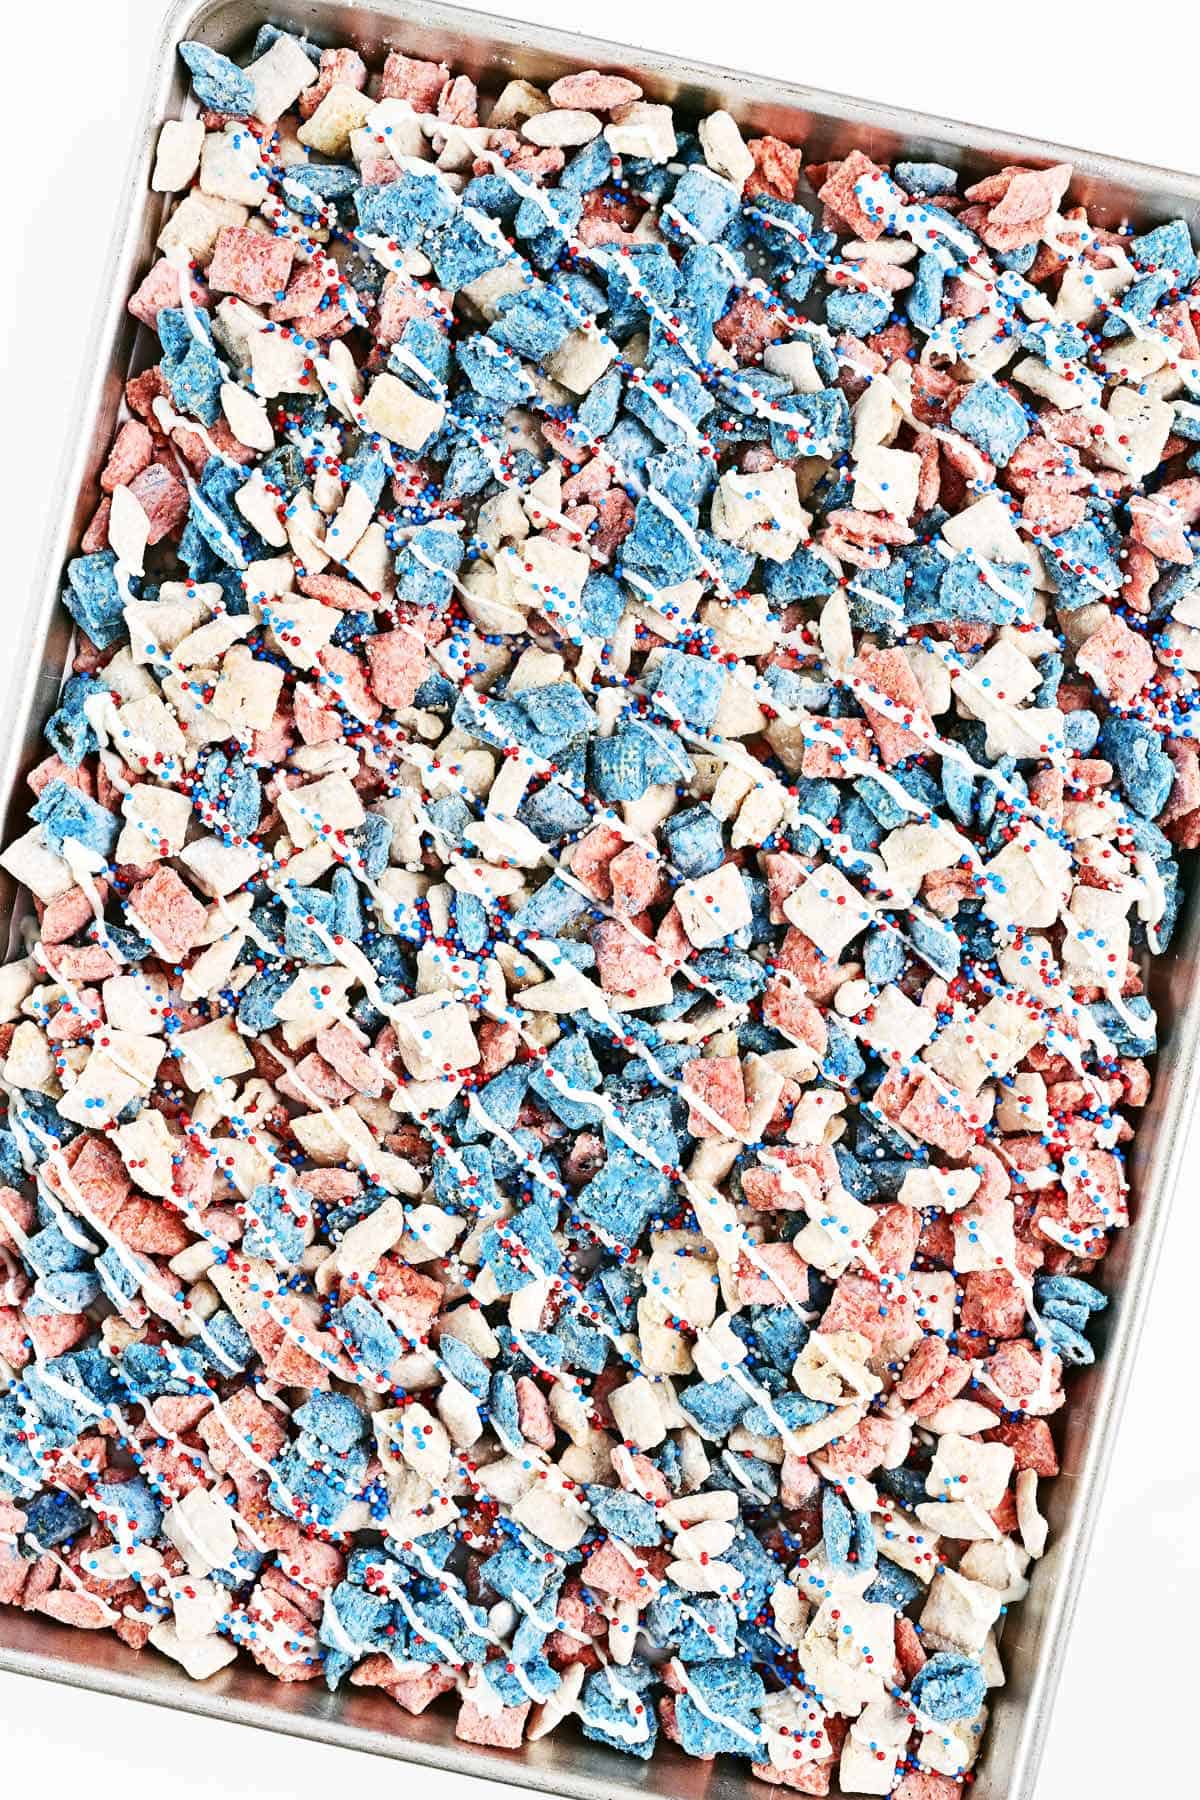 Red white and blue puppy chow on a baking sheet.